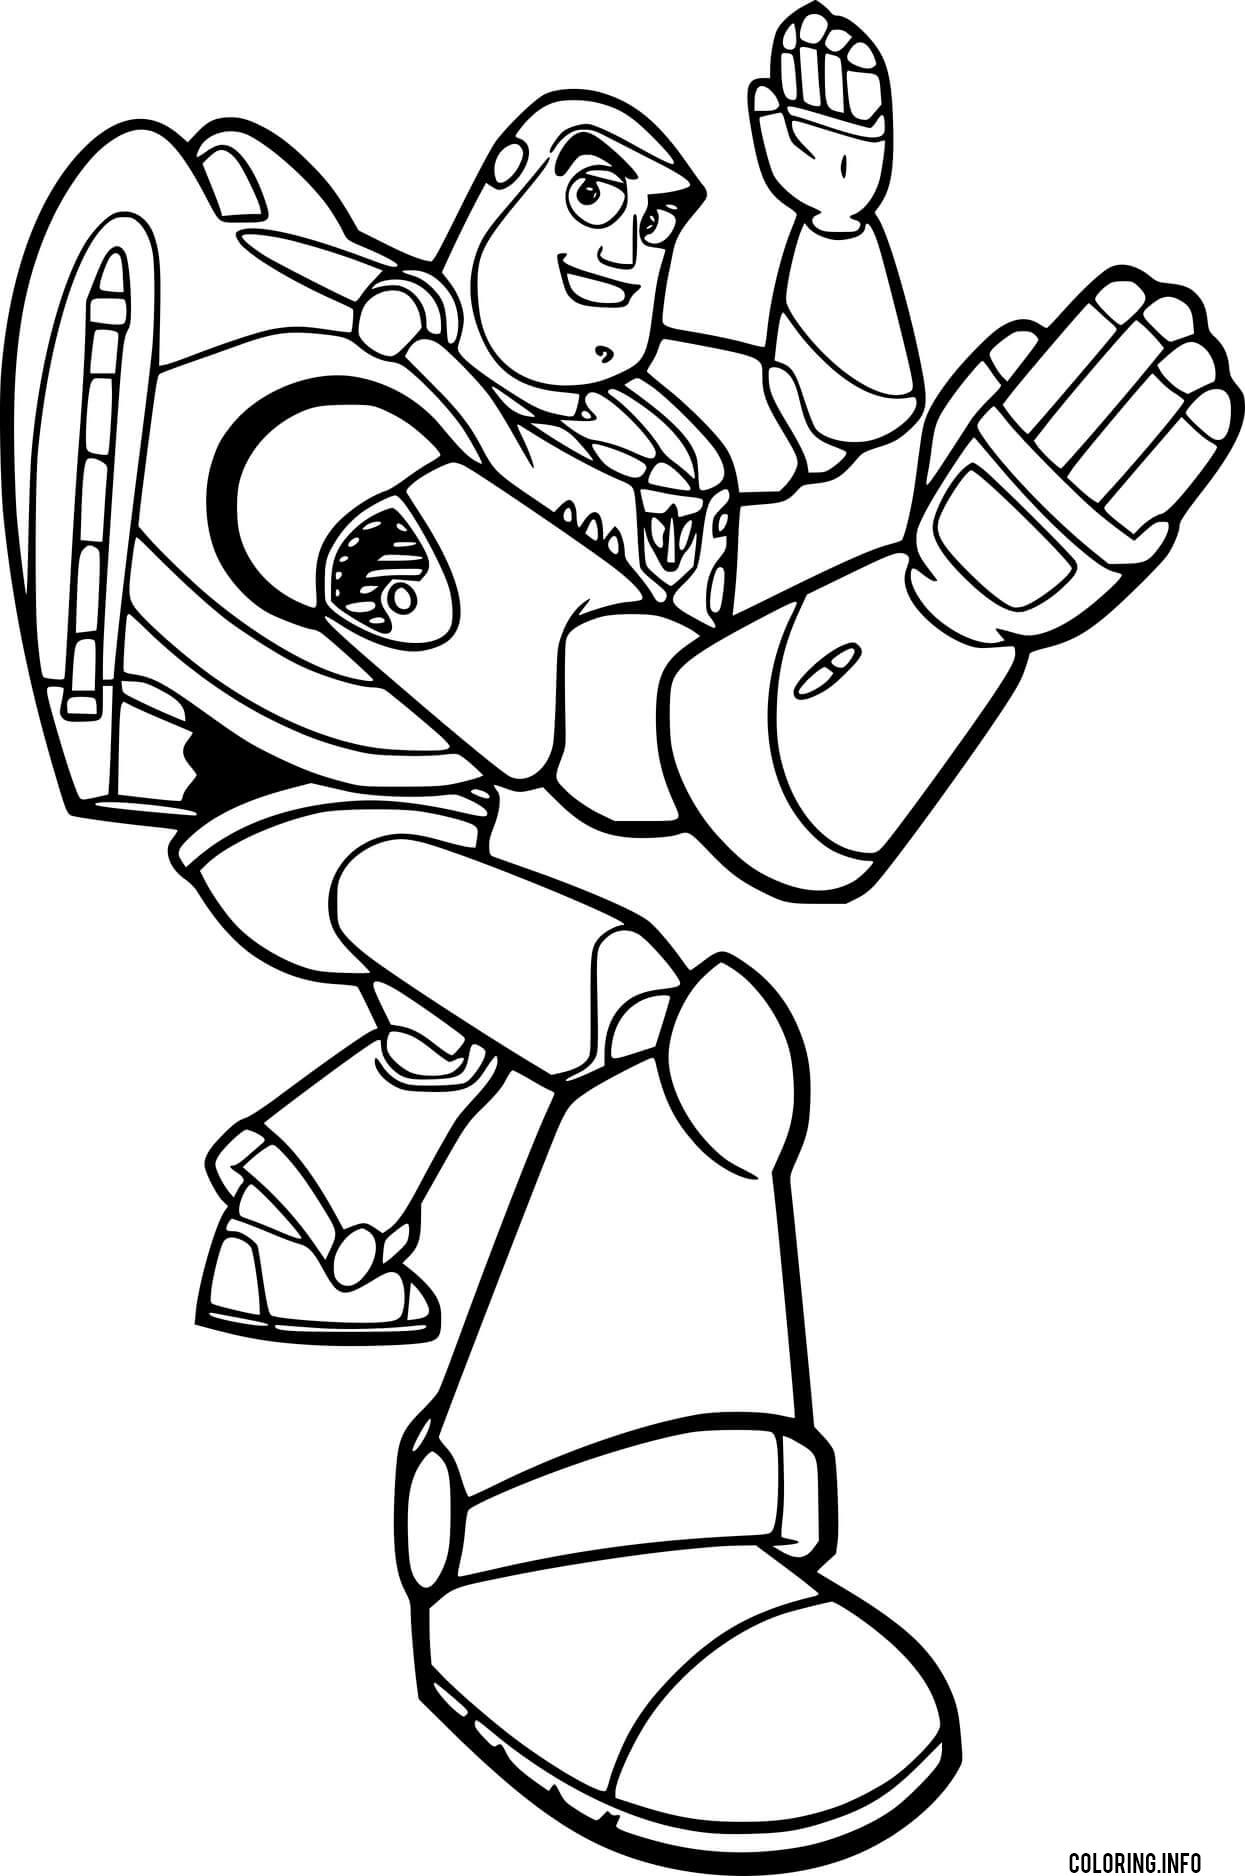 Buzz Lightyear Fighting coloring